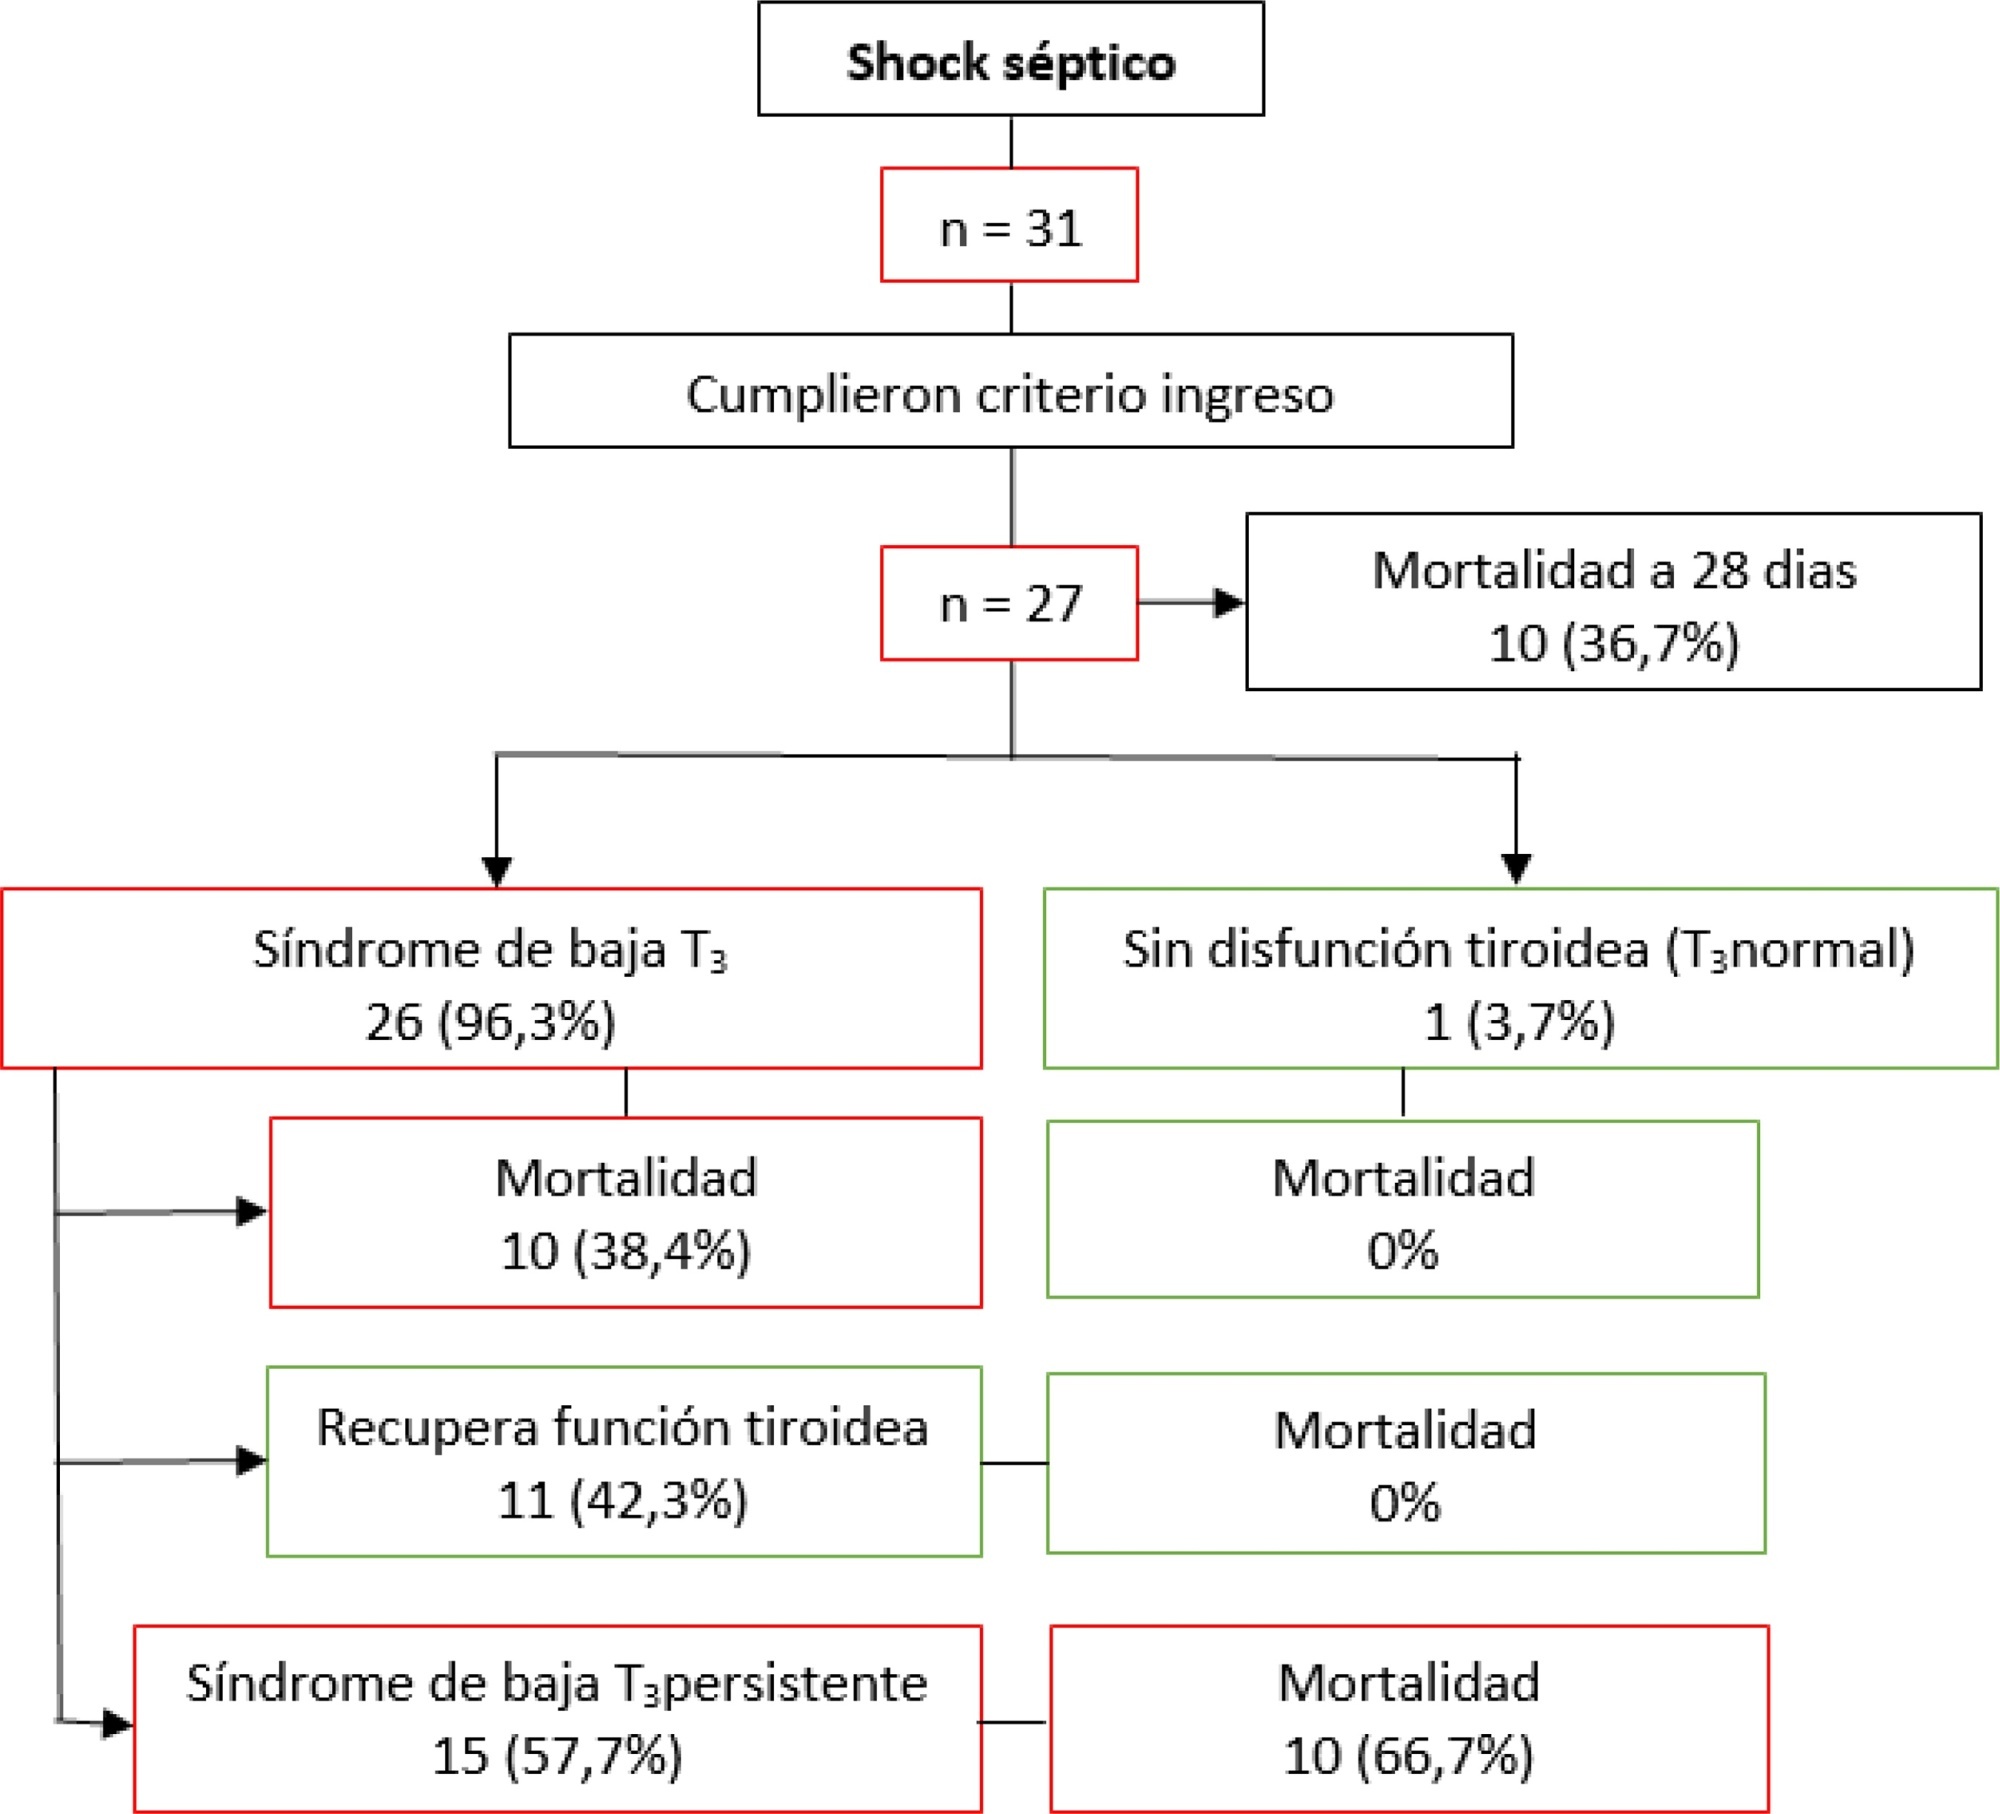 Incidence of low-triiodothyronine syndrome in patients with septic shock